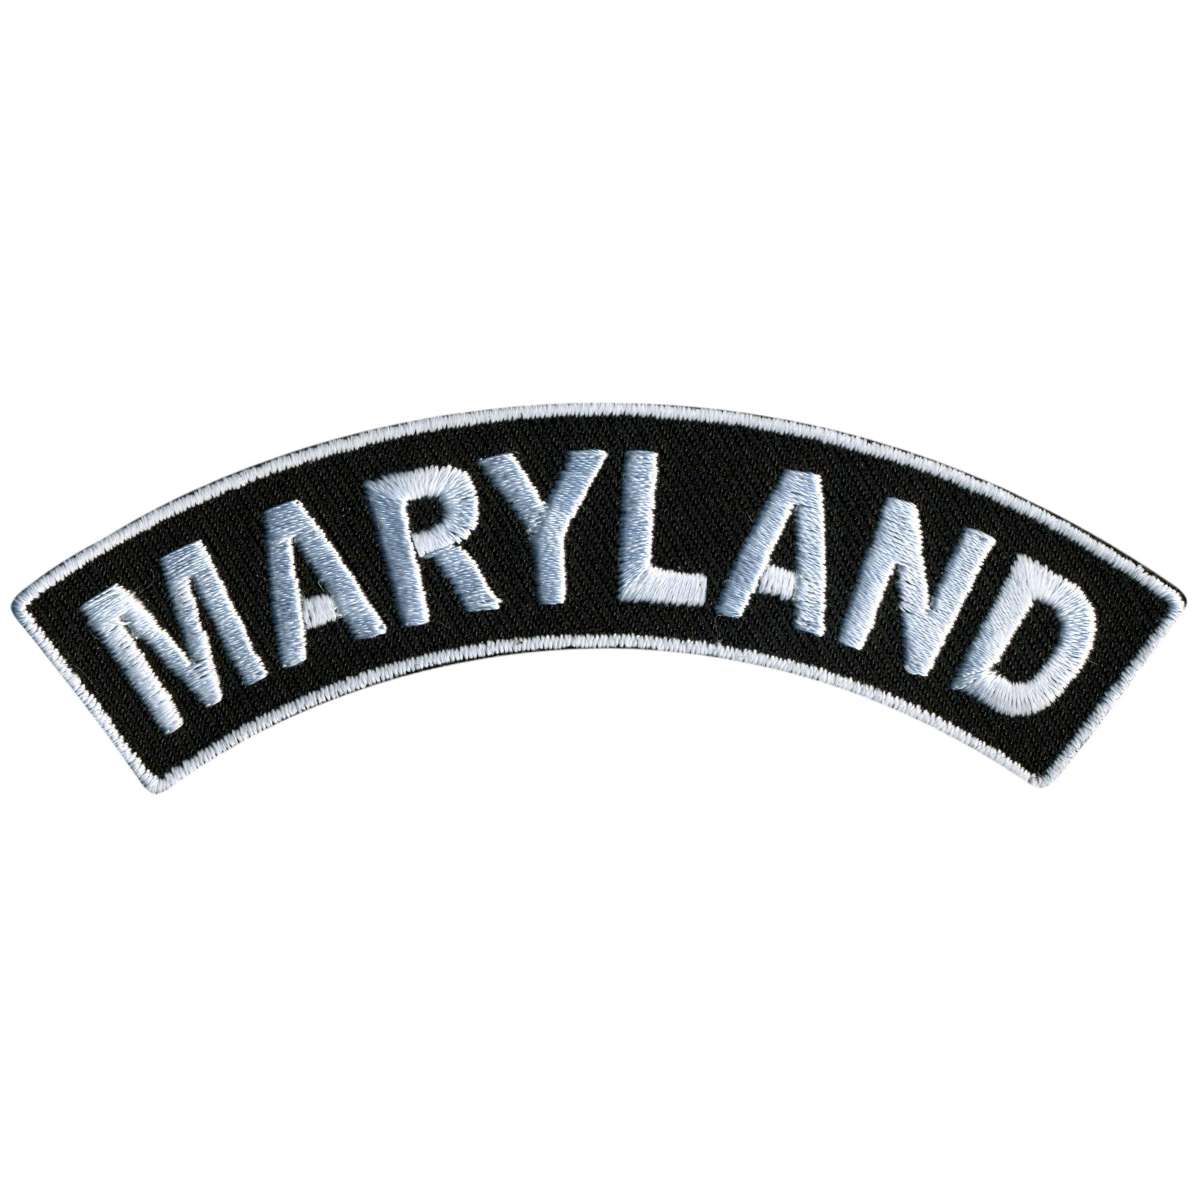 Hot Leathers Maryland 4” X 1” Top Rocker Patch PPM4040